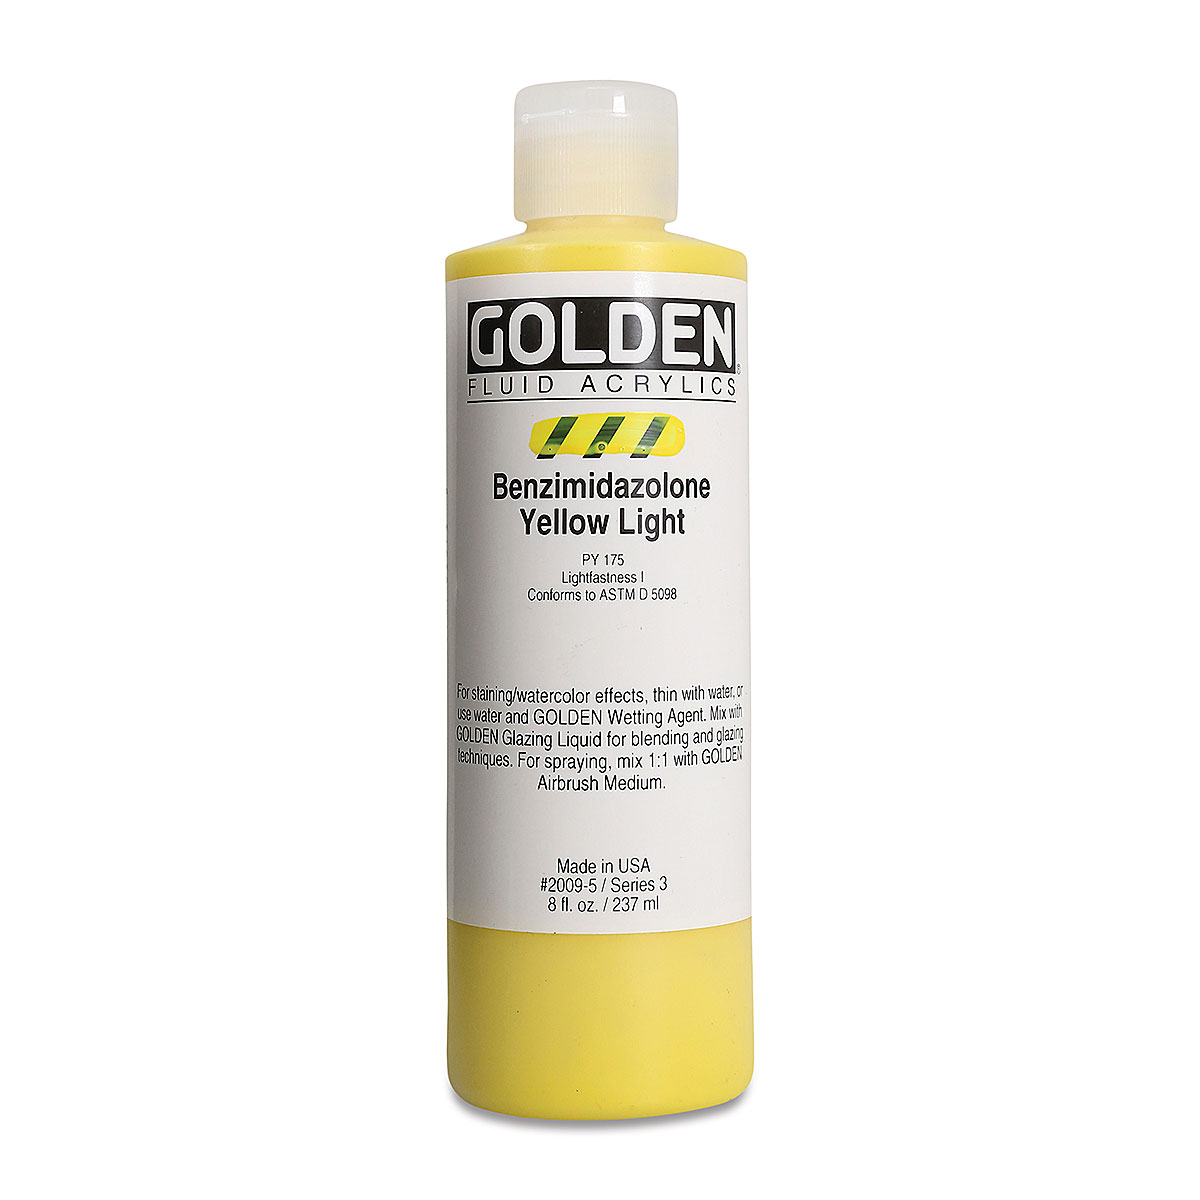 Golden Color Pouring Set, 5 Fluid Acrylic colors and 1 Gloss Pouring Medium  (972-0)